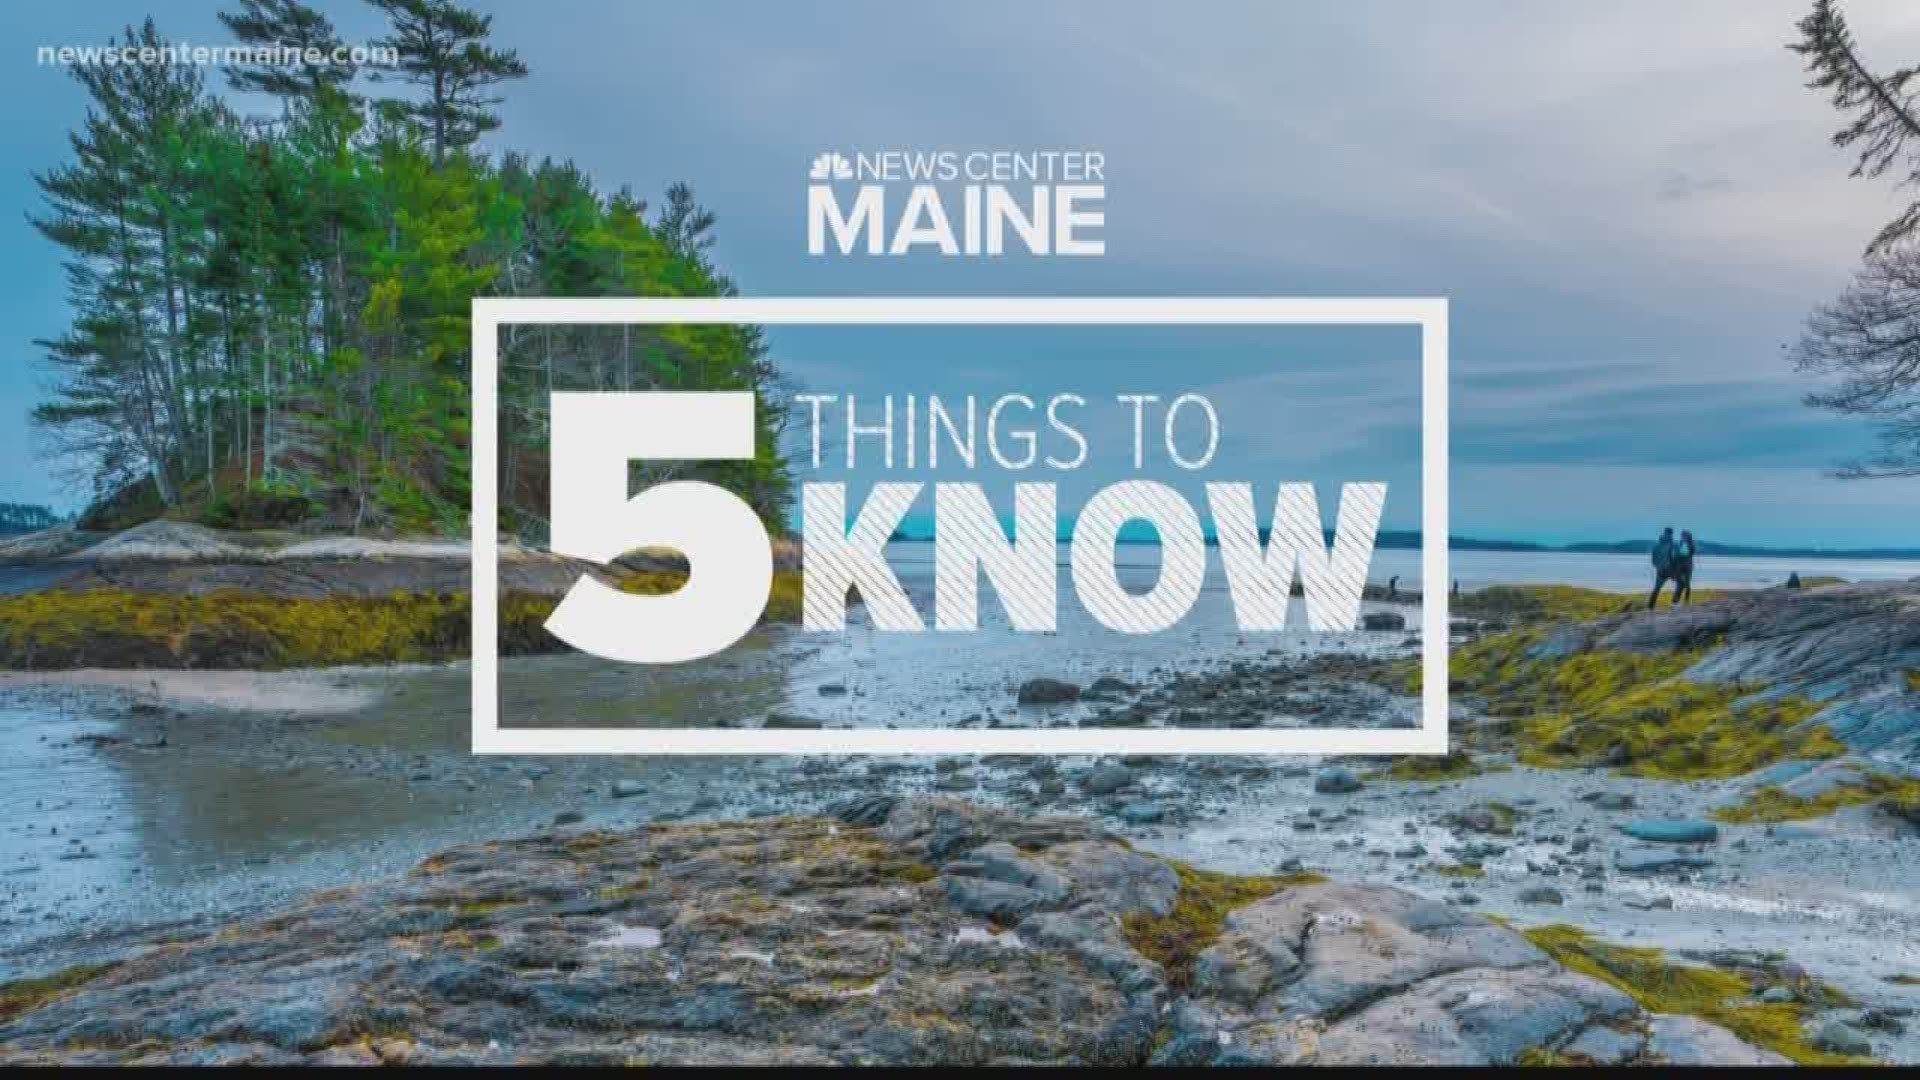 The top stories for Wednesday, June 20 include the vote count in Maine's first statewide ranked-choice election gets back on track after being delayed by a glitch, questions about the safety of brown water in Waterville, and more